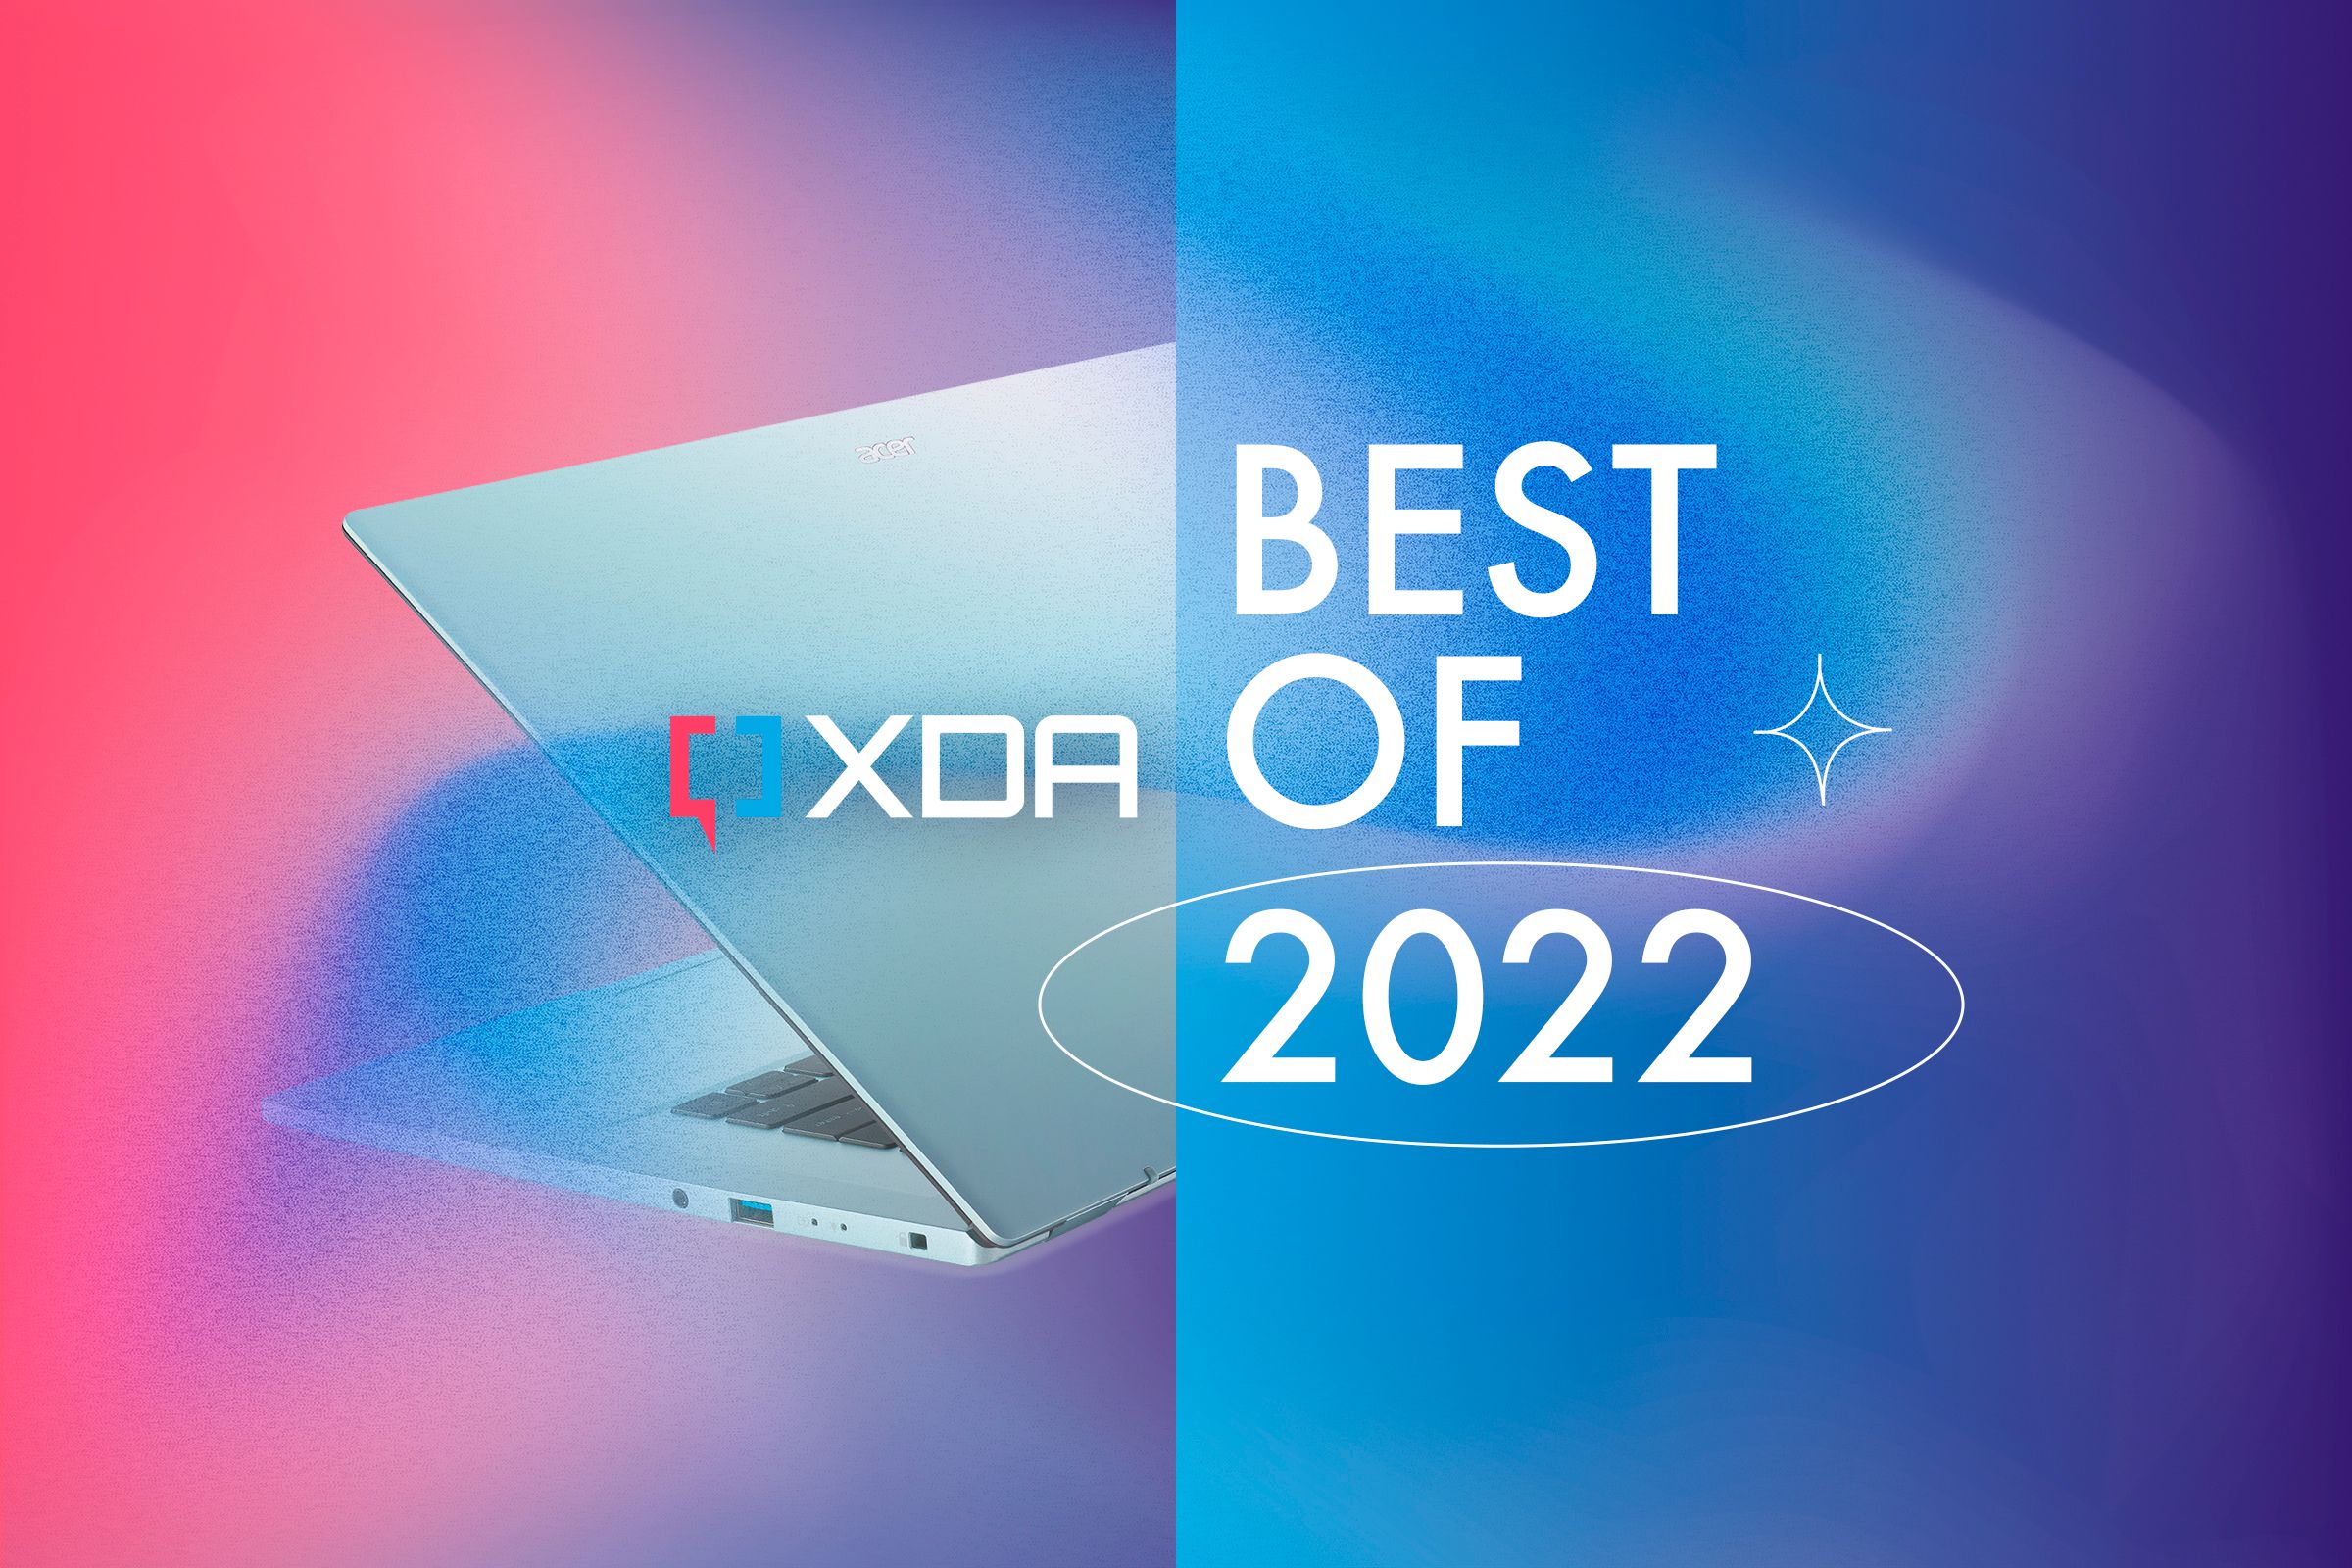 A graphic showing a laptop seen at an angle with the XDA logo overlaid on top of it next to text reading 